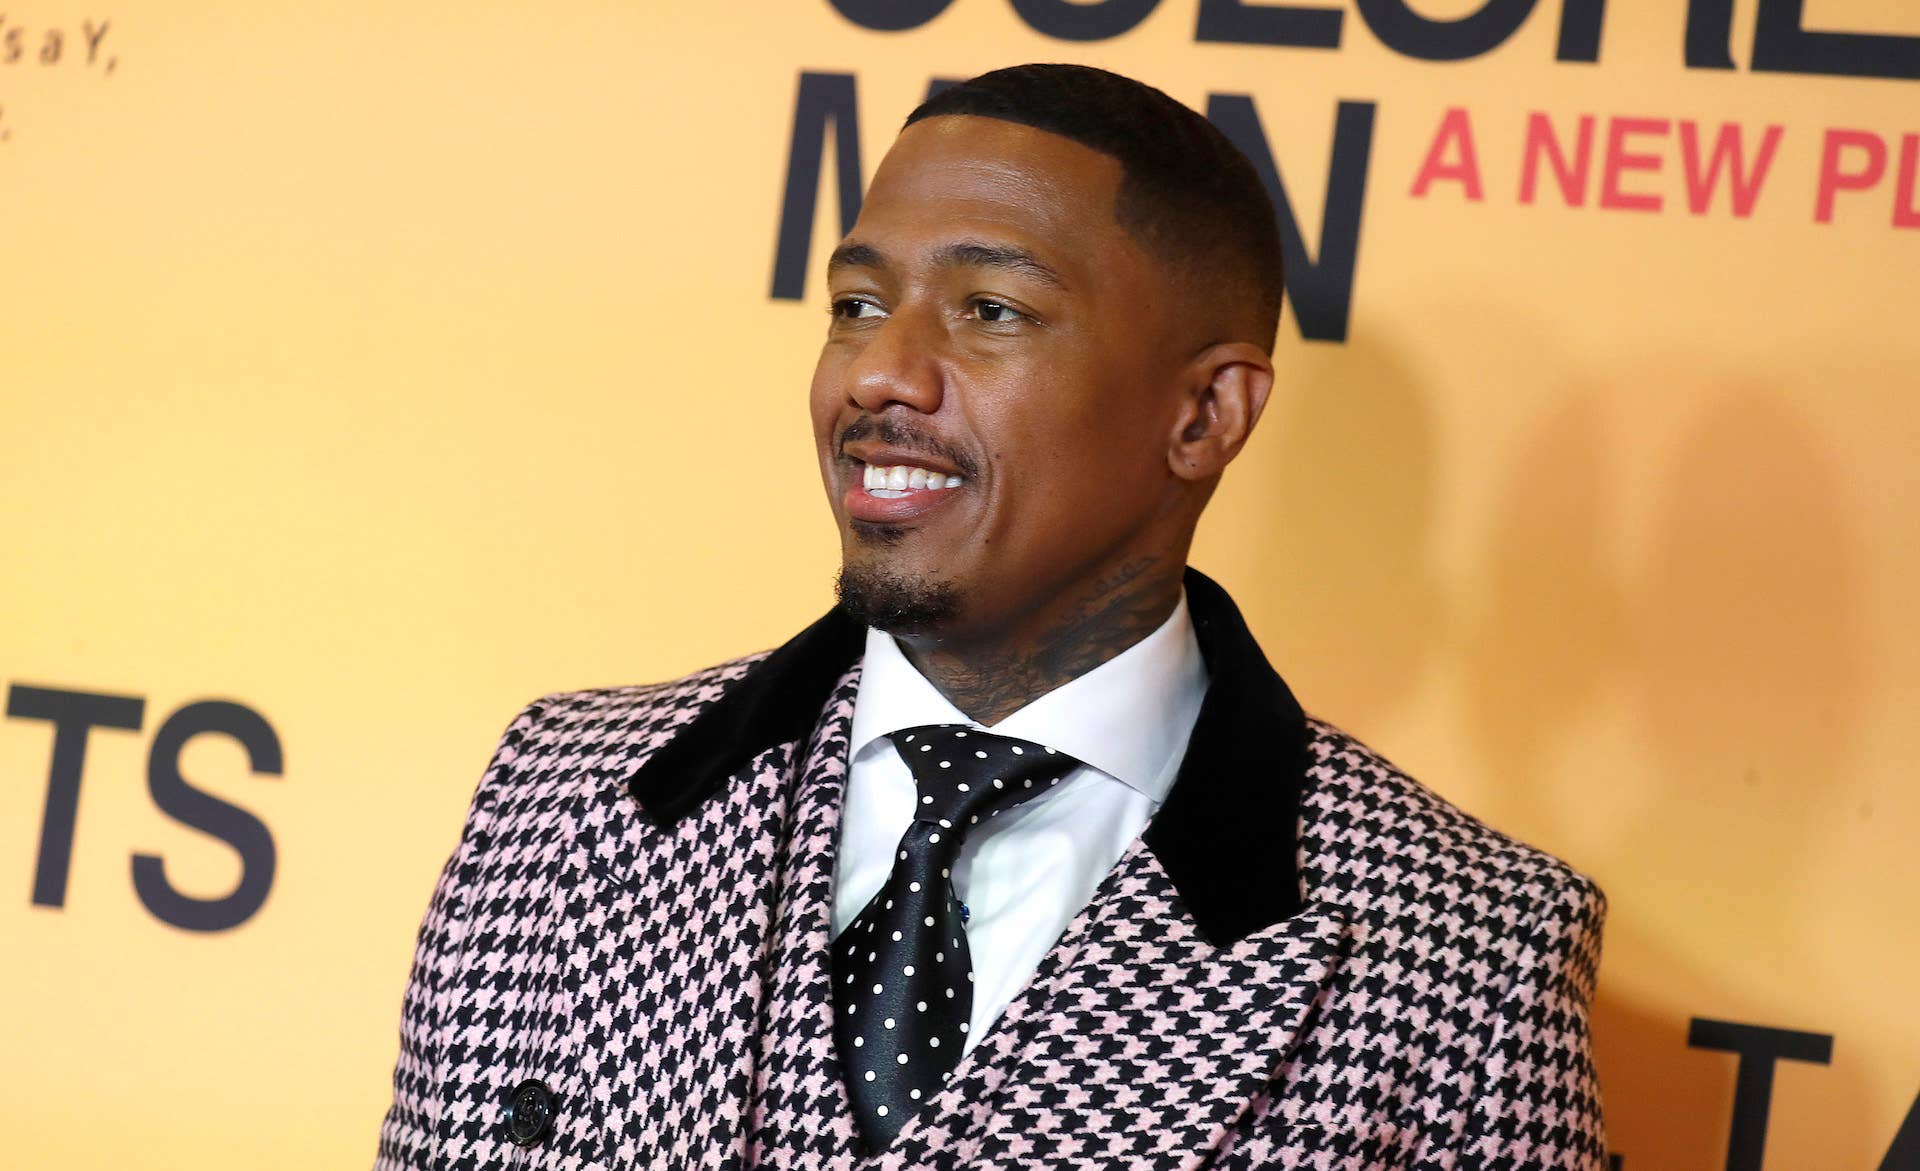 Nick Cannon on red carpet for 'Thoughts of a Colored Man' premiere